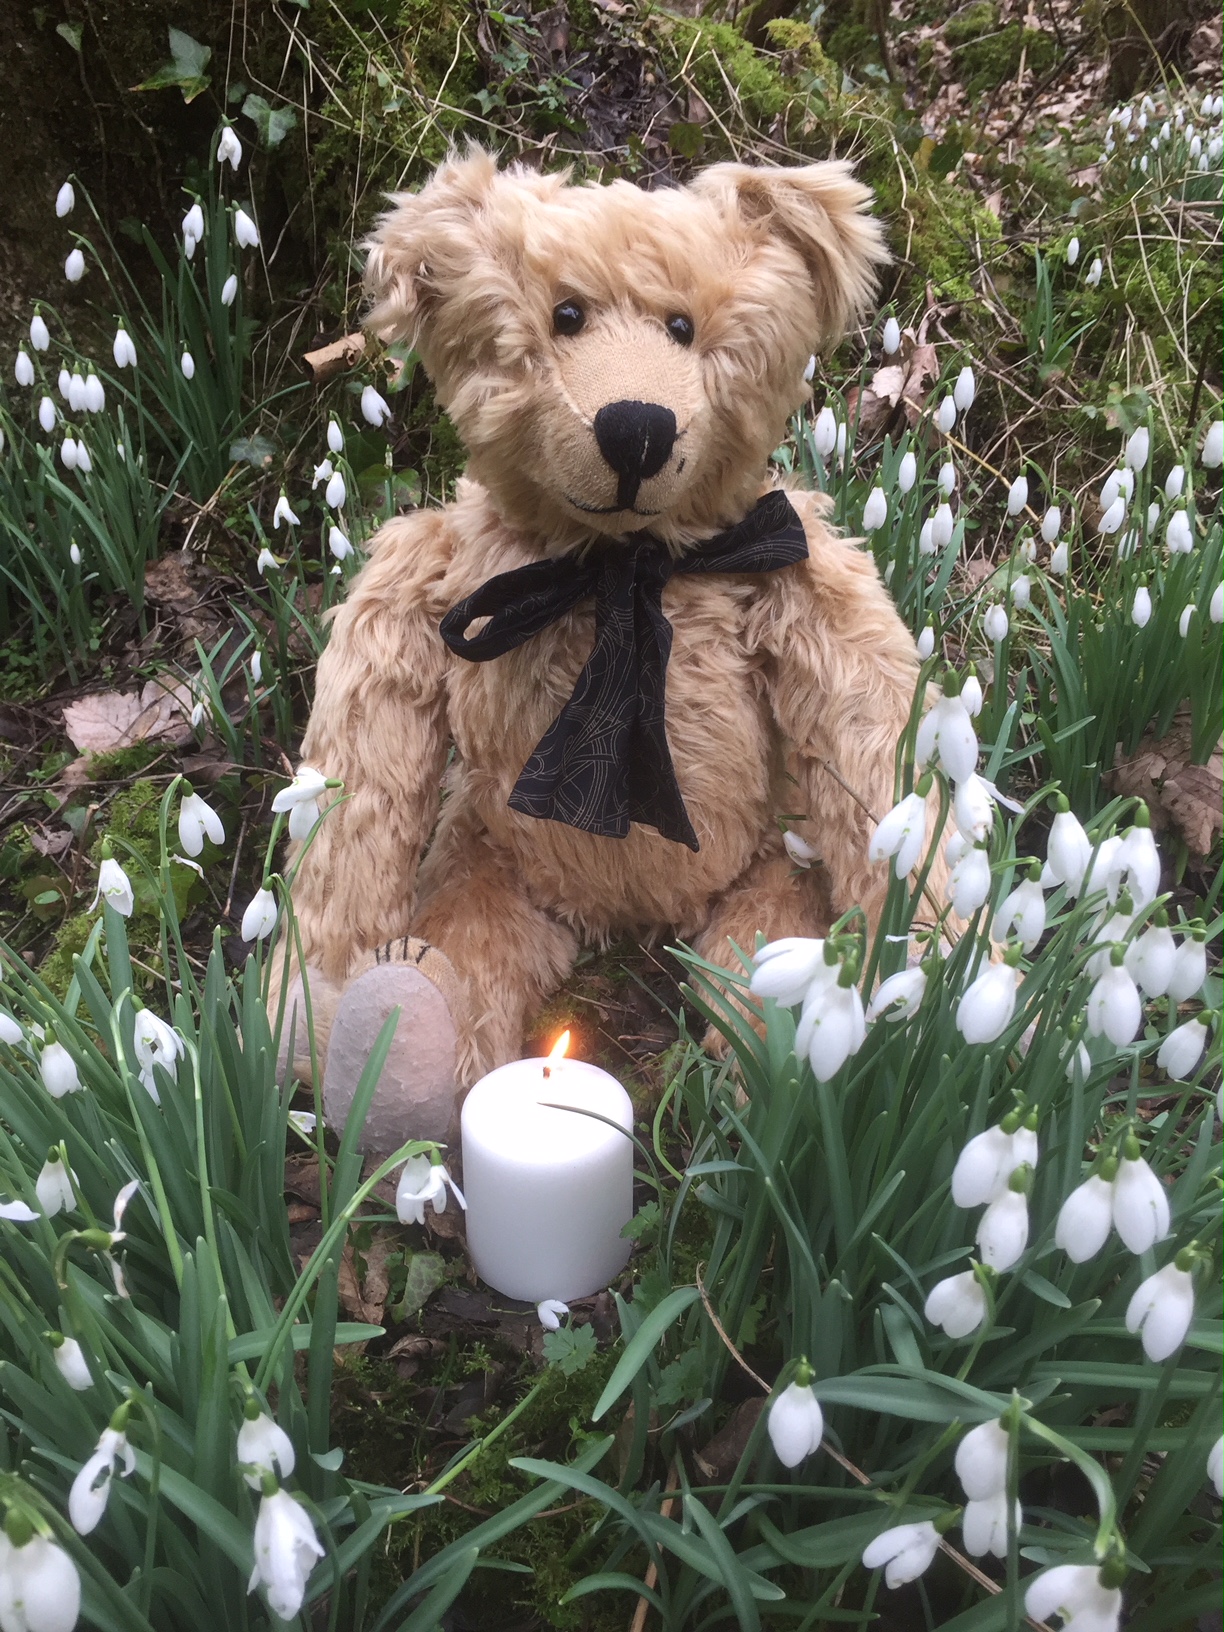 Cotswolds: Lighting a candle for Diddley.